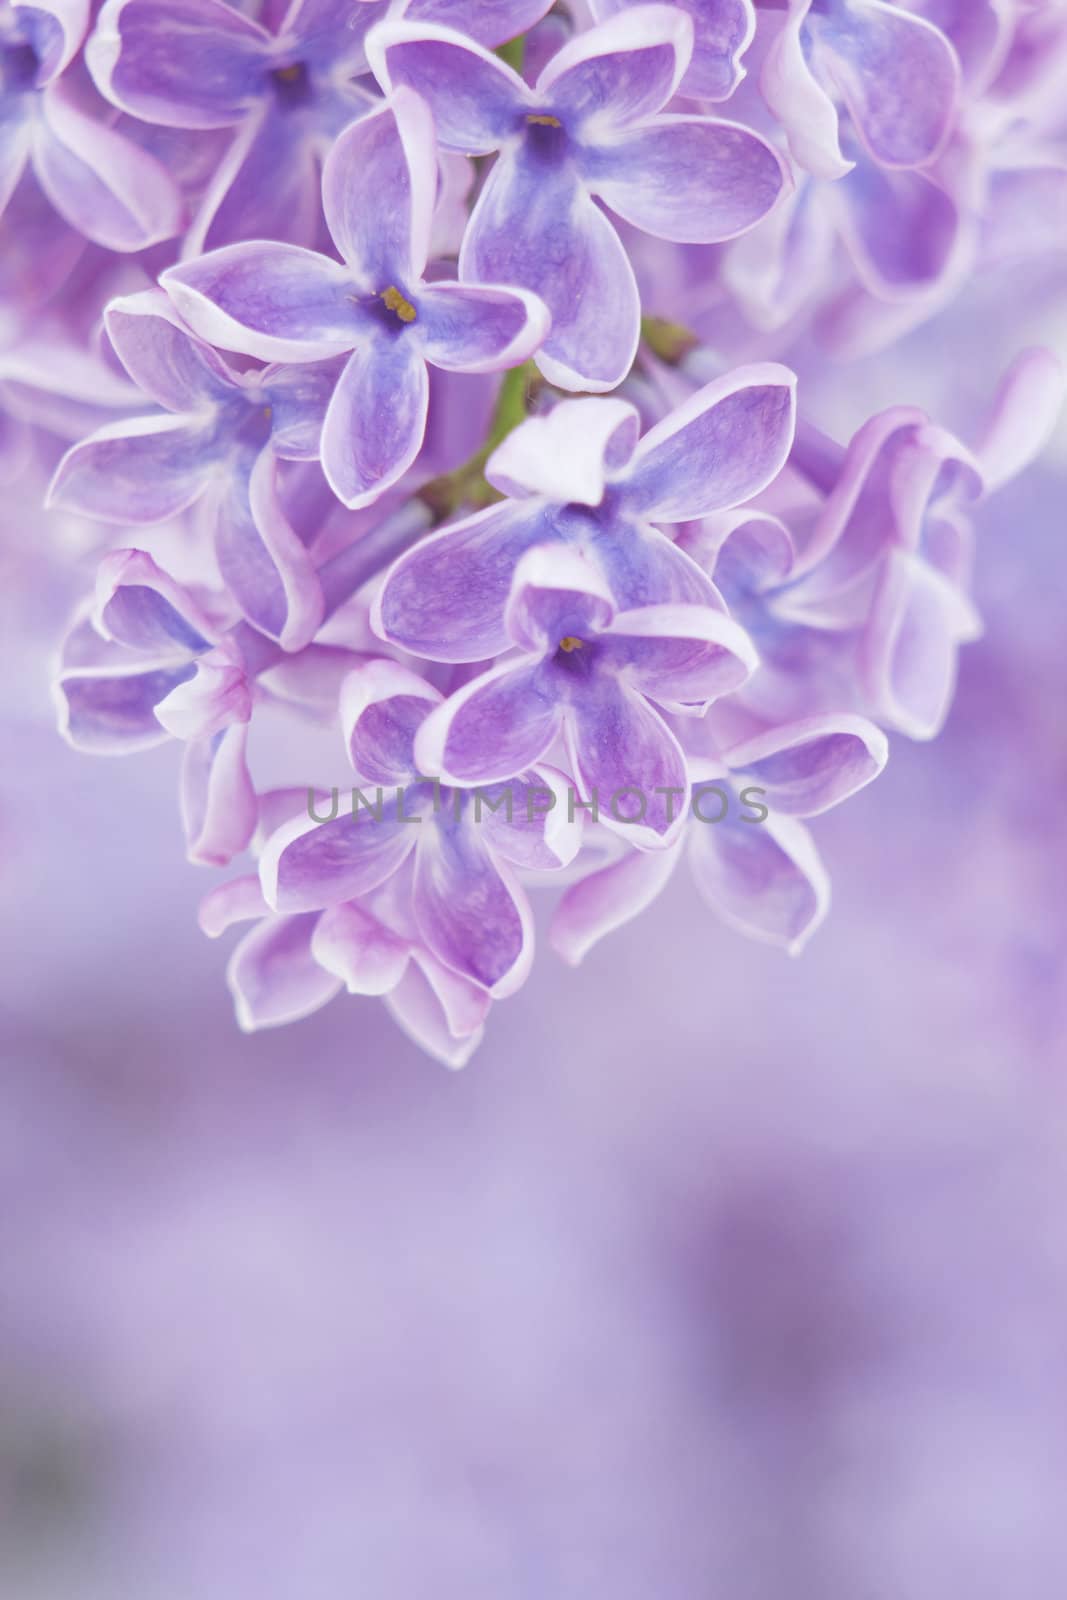 Blooming lilac flowers by miradrozdowski